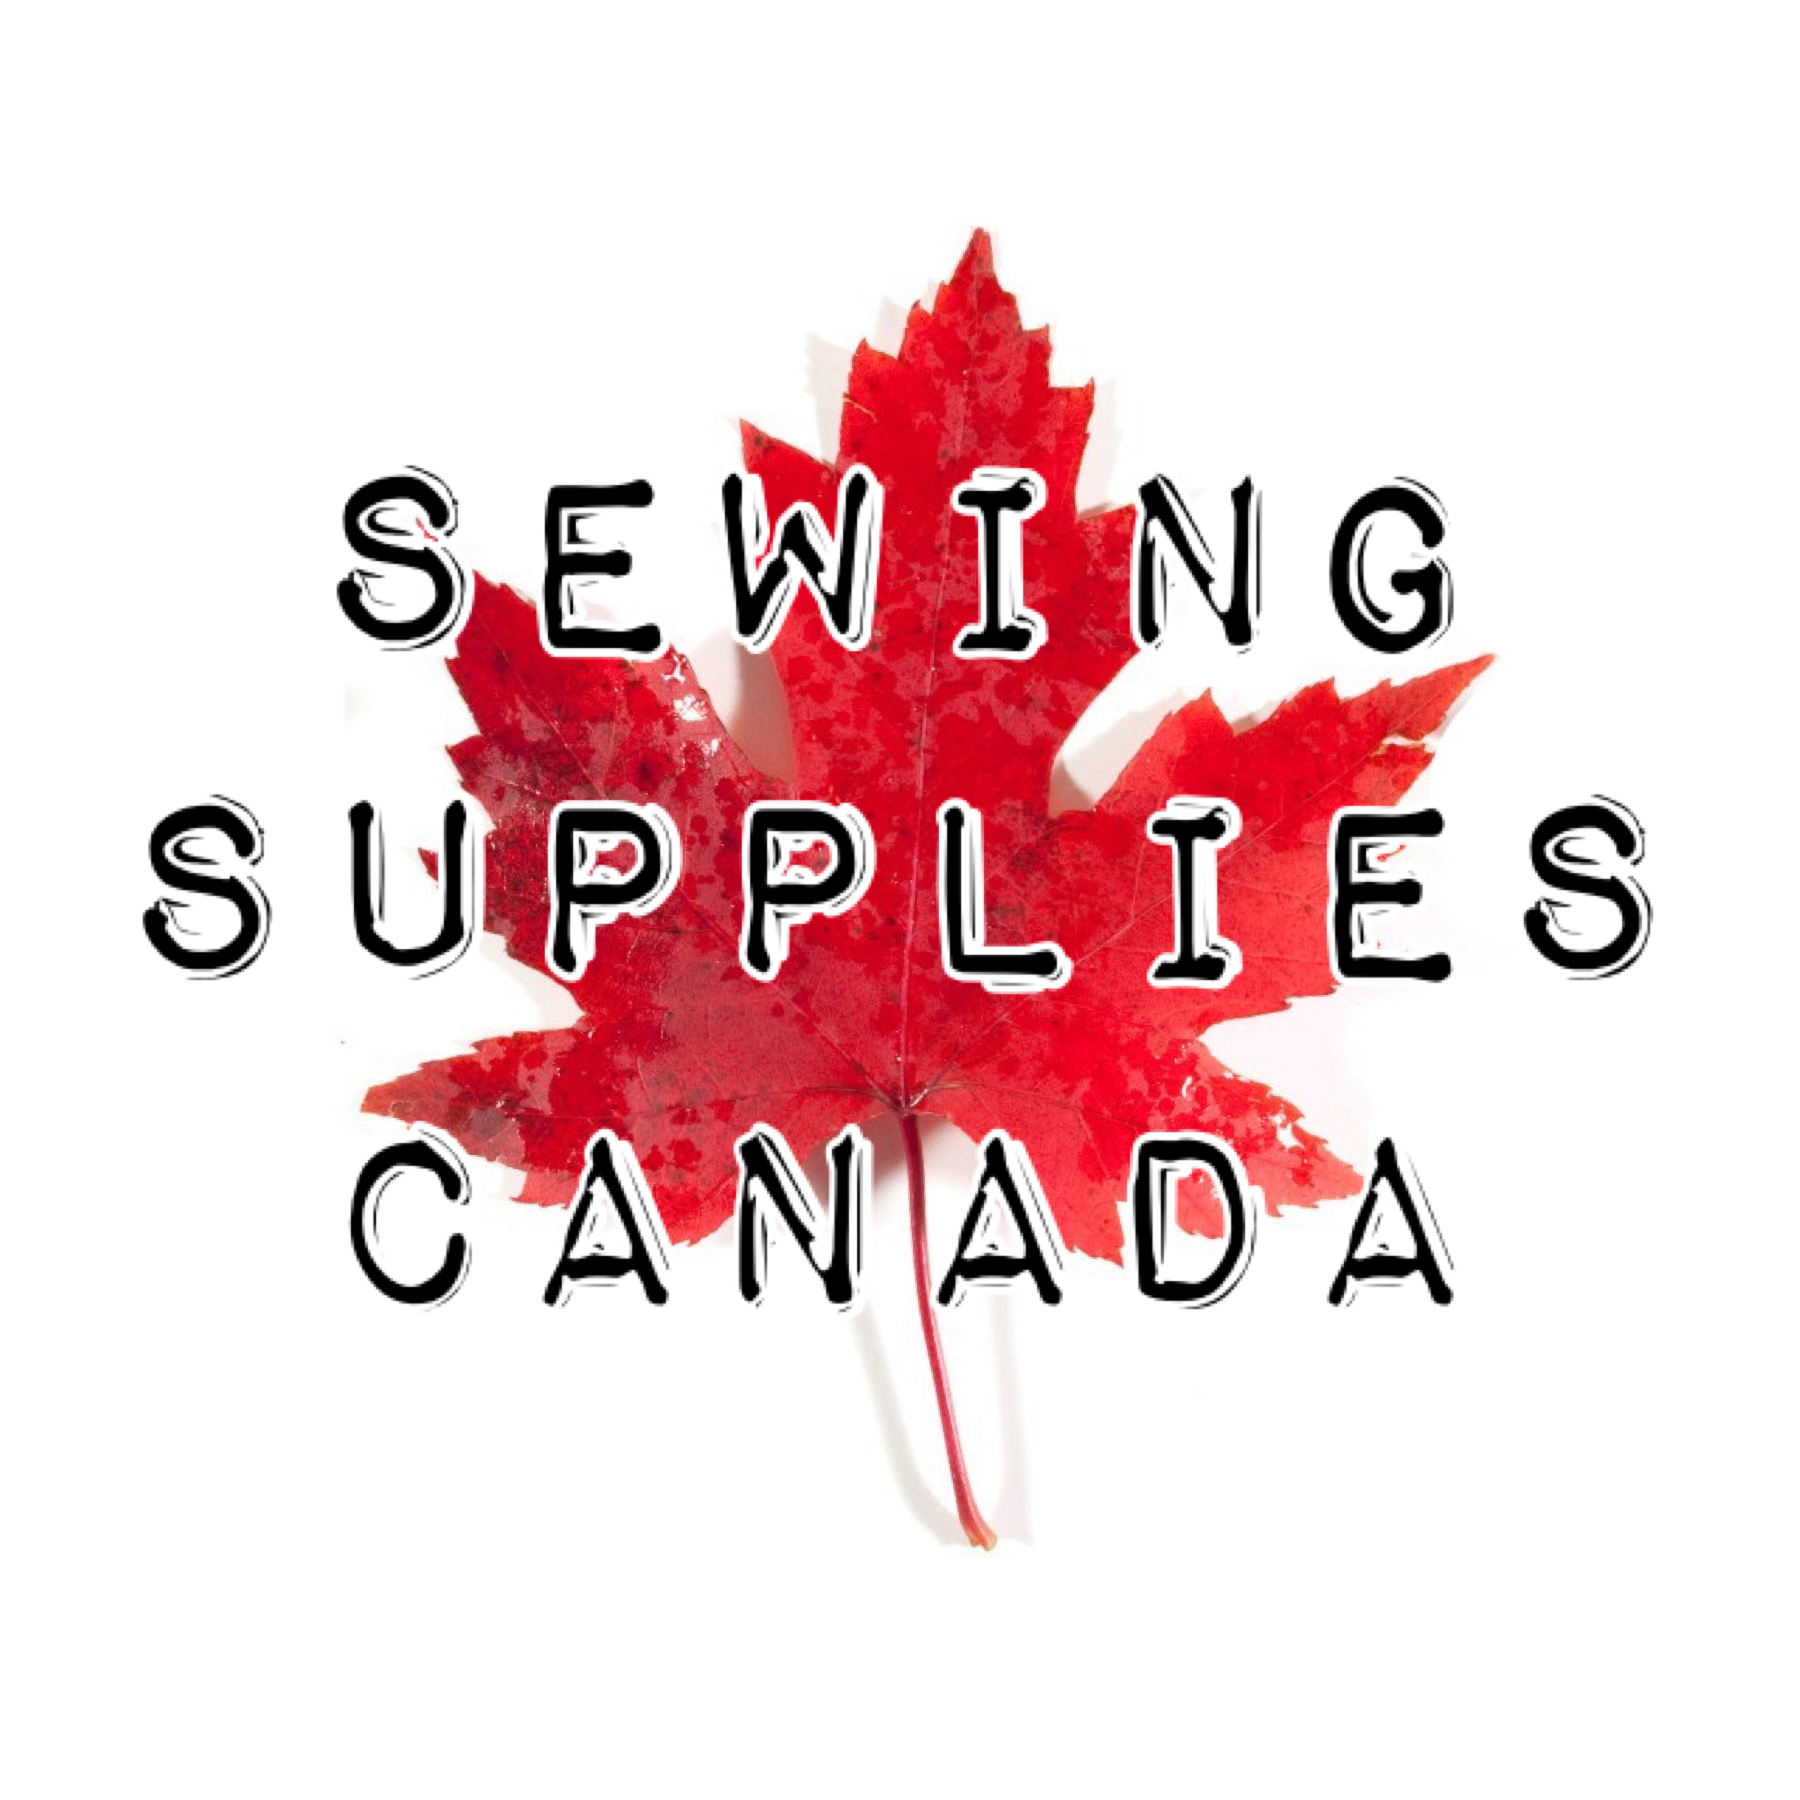 Sewing Supplies Canada - Highest quality fabrics and sewing notions